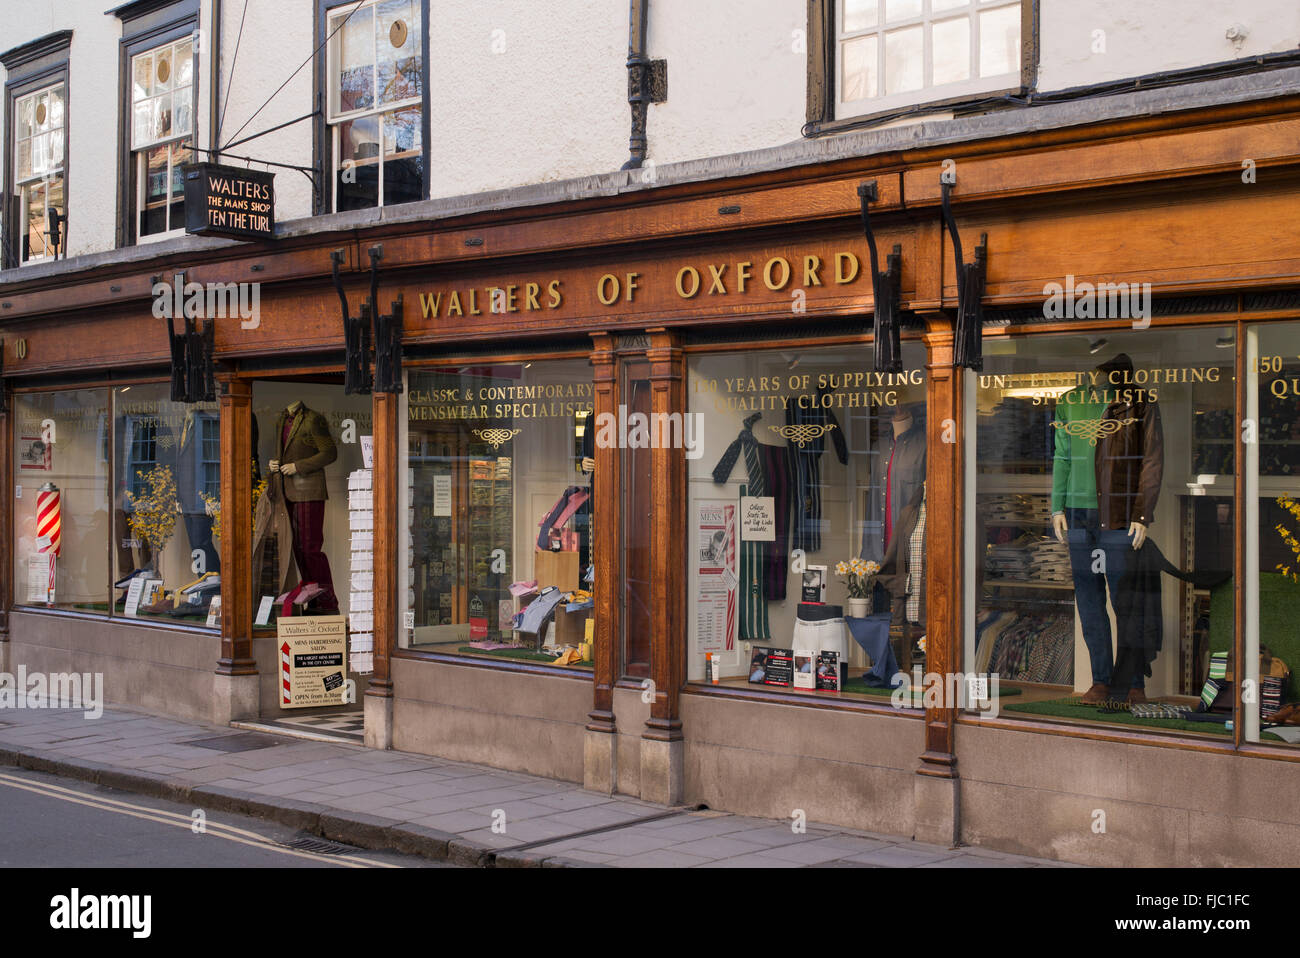 Walters of oxford. Menswear clothing shop. Turl Street, Oxford, England Stock Photo